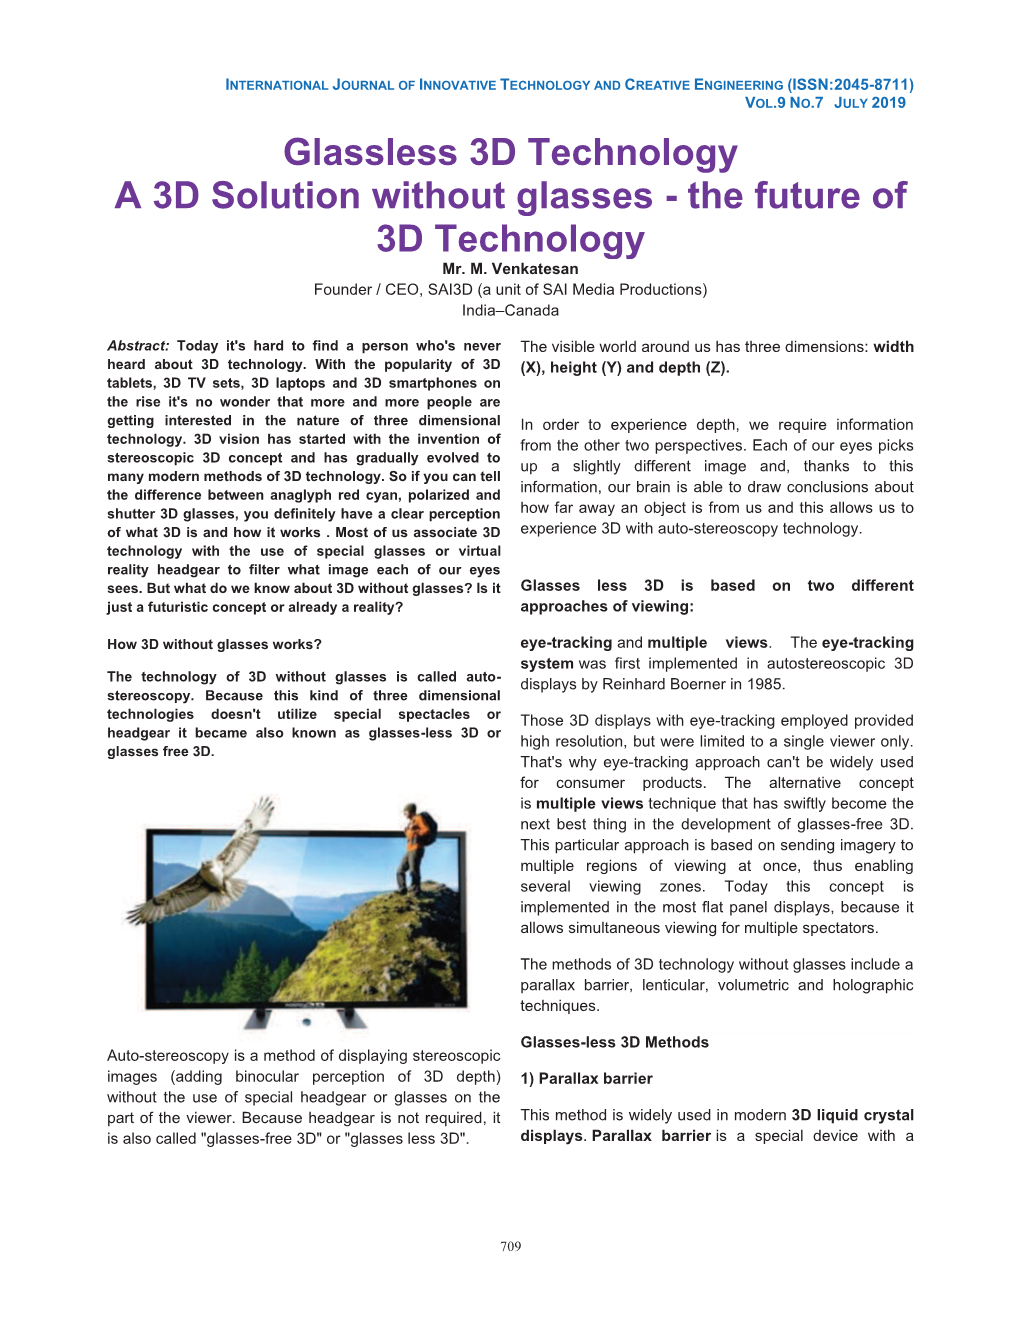 Glassless 3D Technology a 3D Solution Without Glasses - the Future of 3D Technology Mr